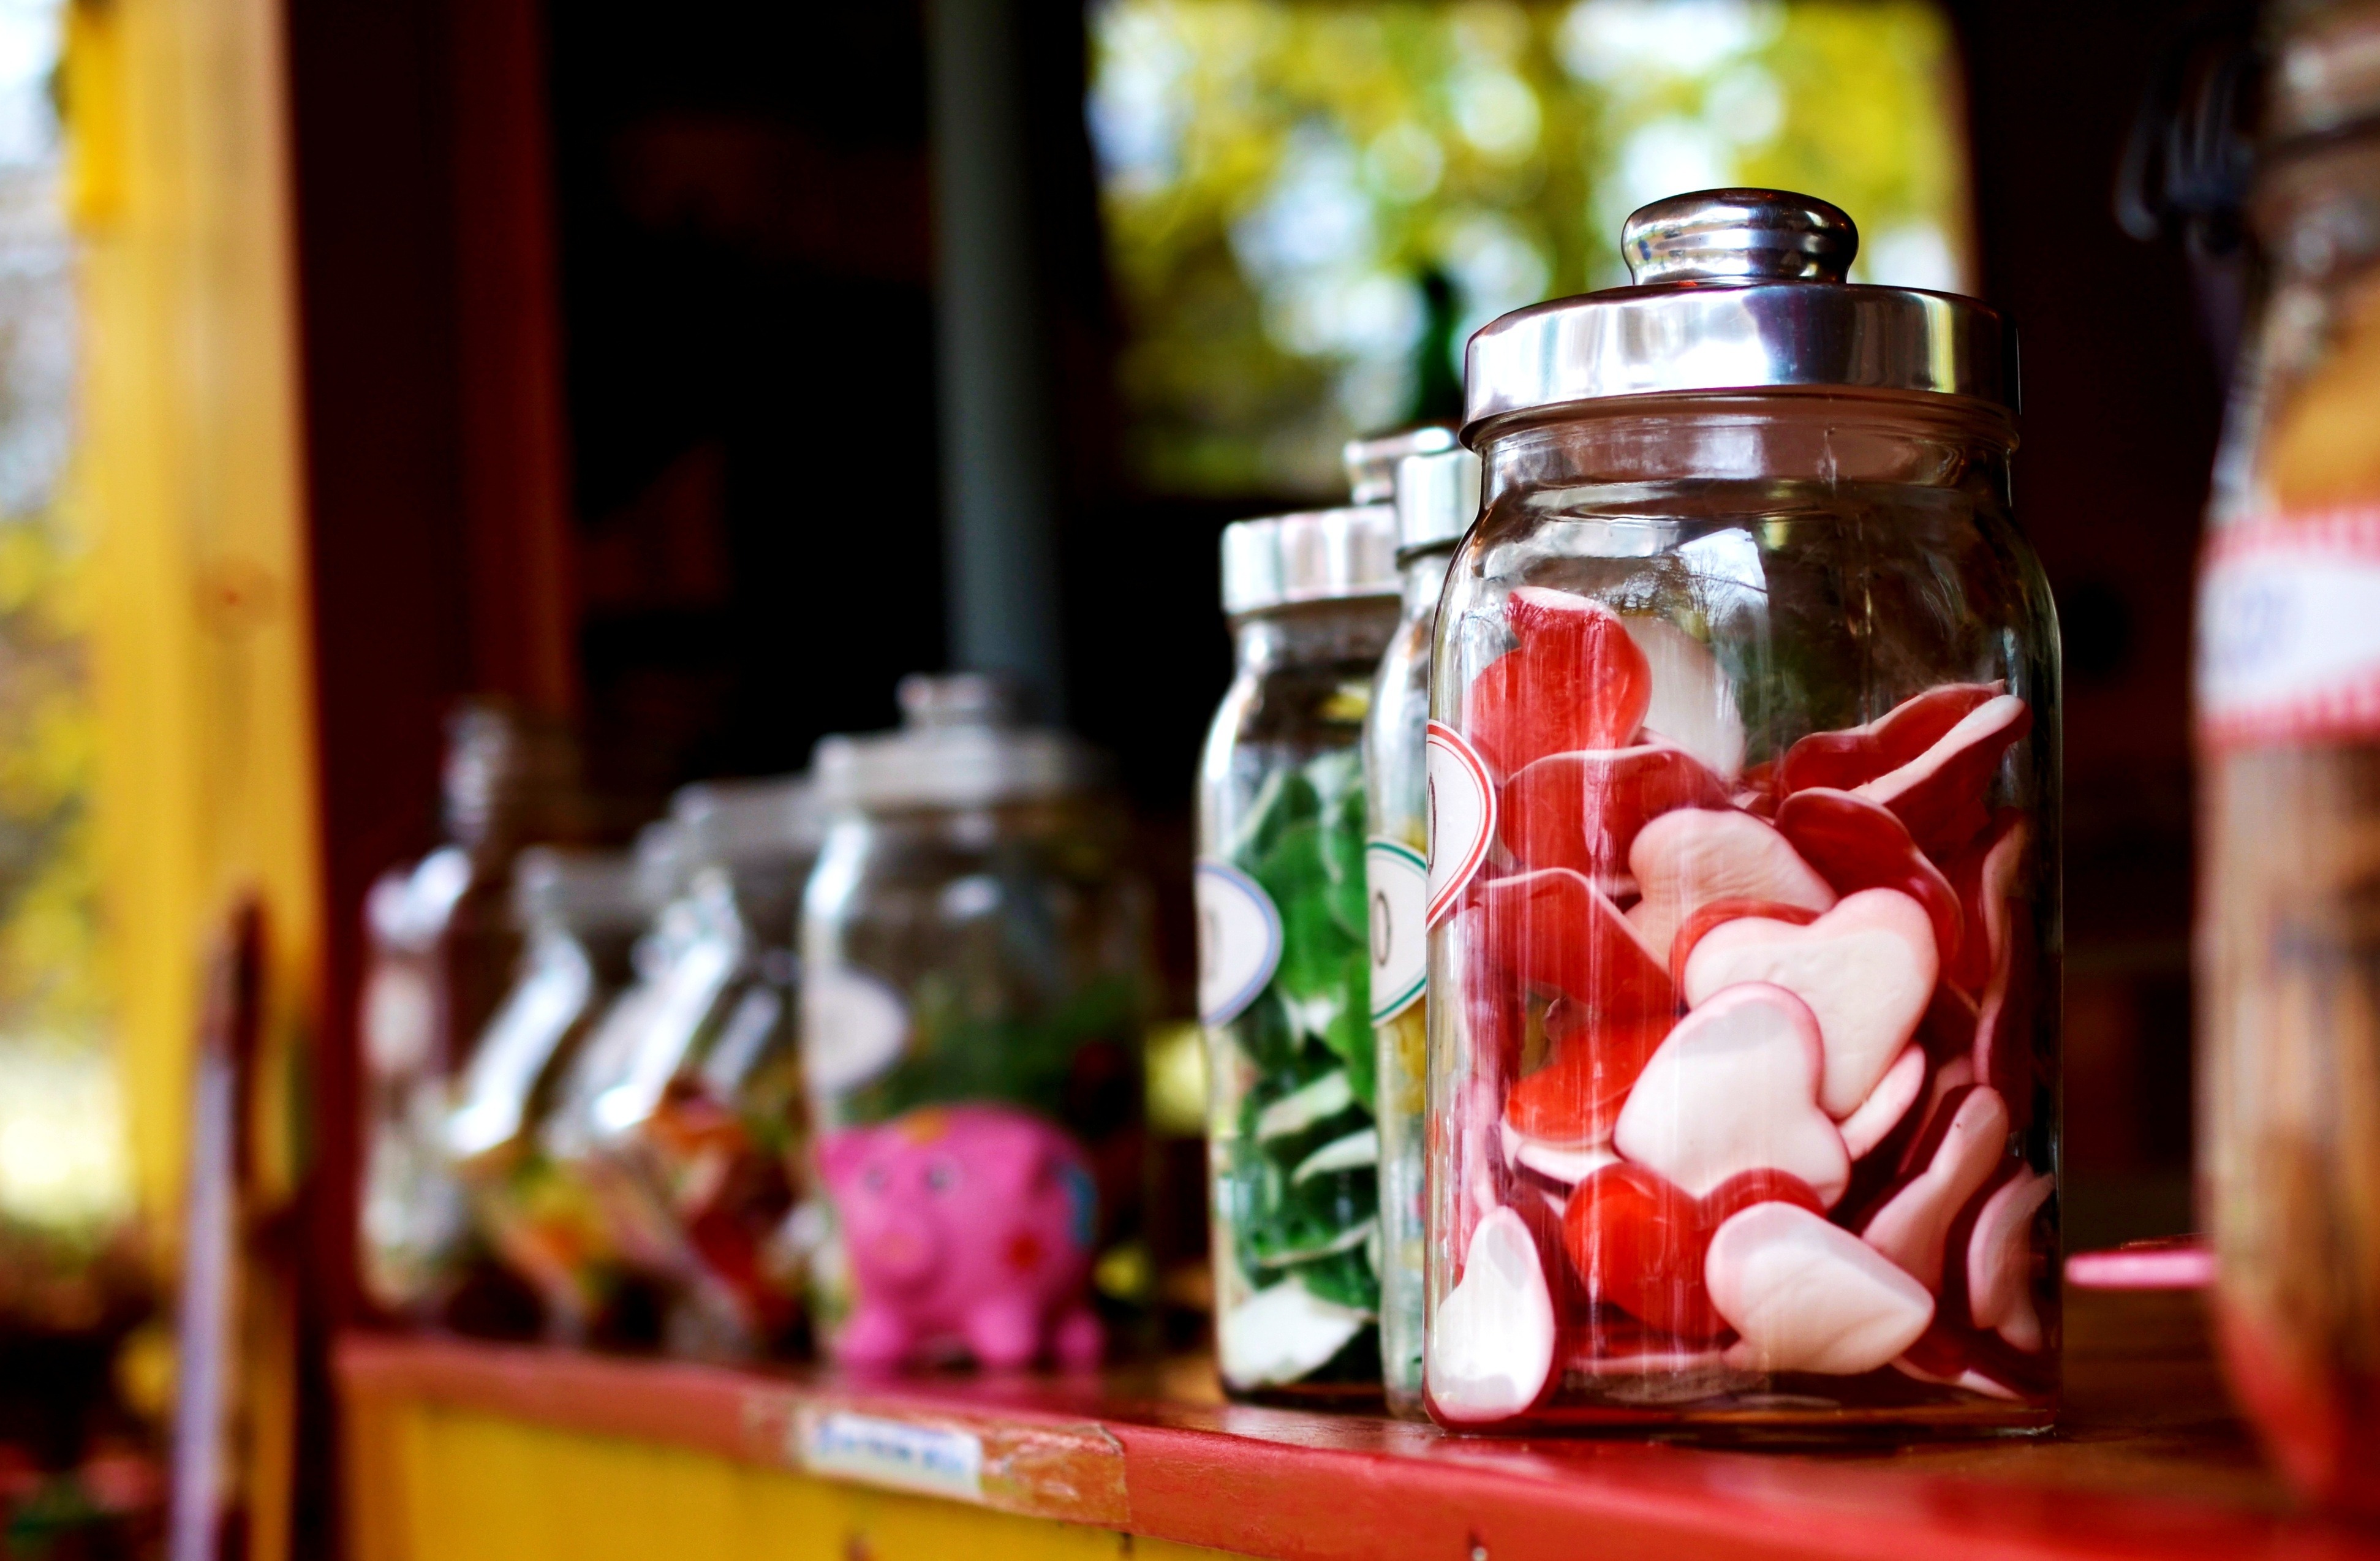 Improve Employee Productivity and Job Satisfaction with Office Lolly and Snack Jars 